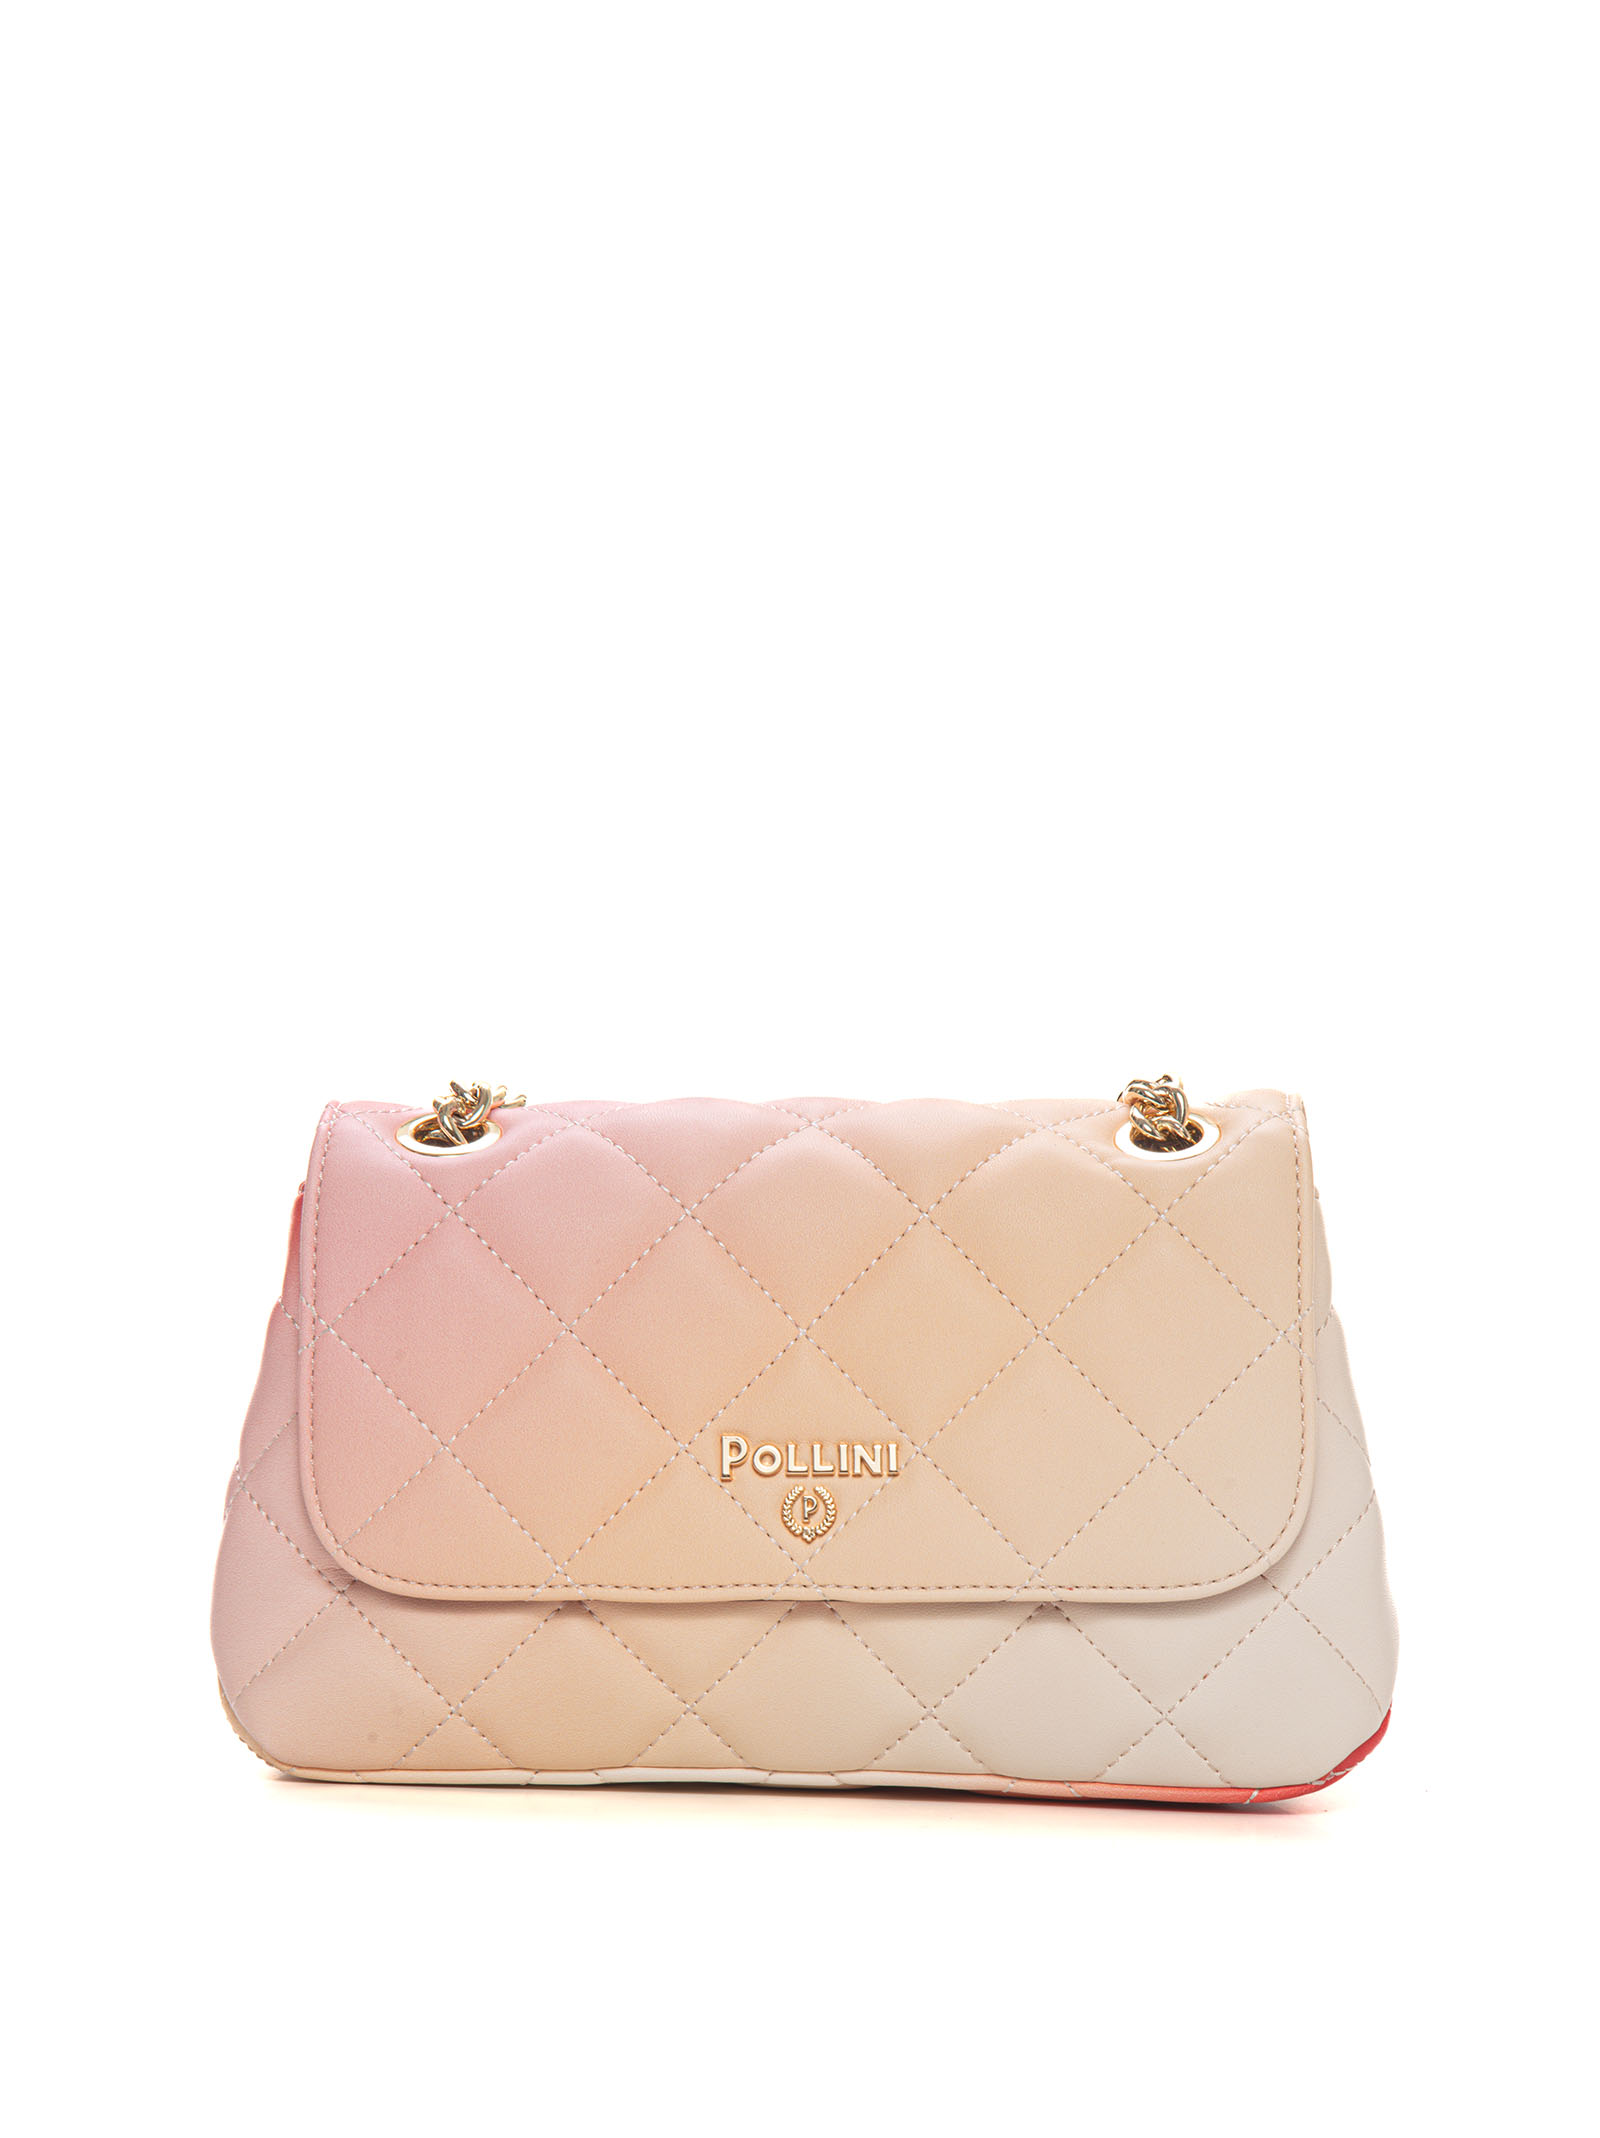 Pollini Piccola Chanel Chanel Style Bag In Pink